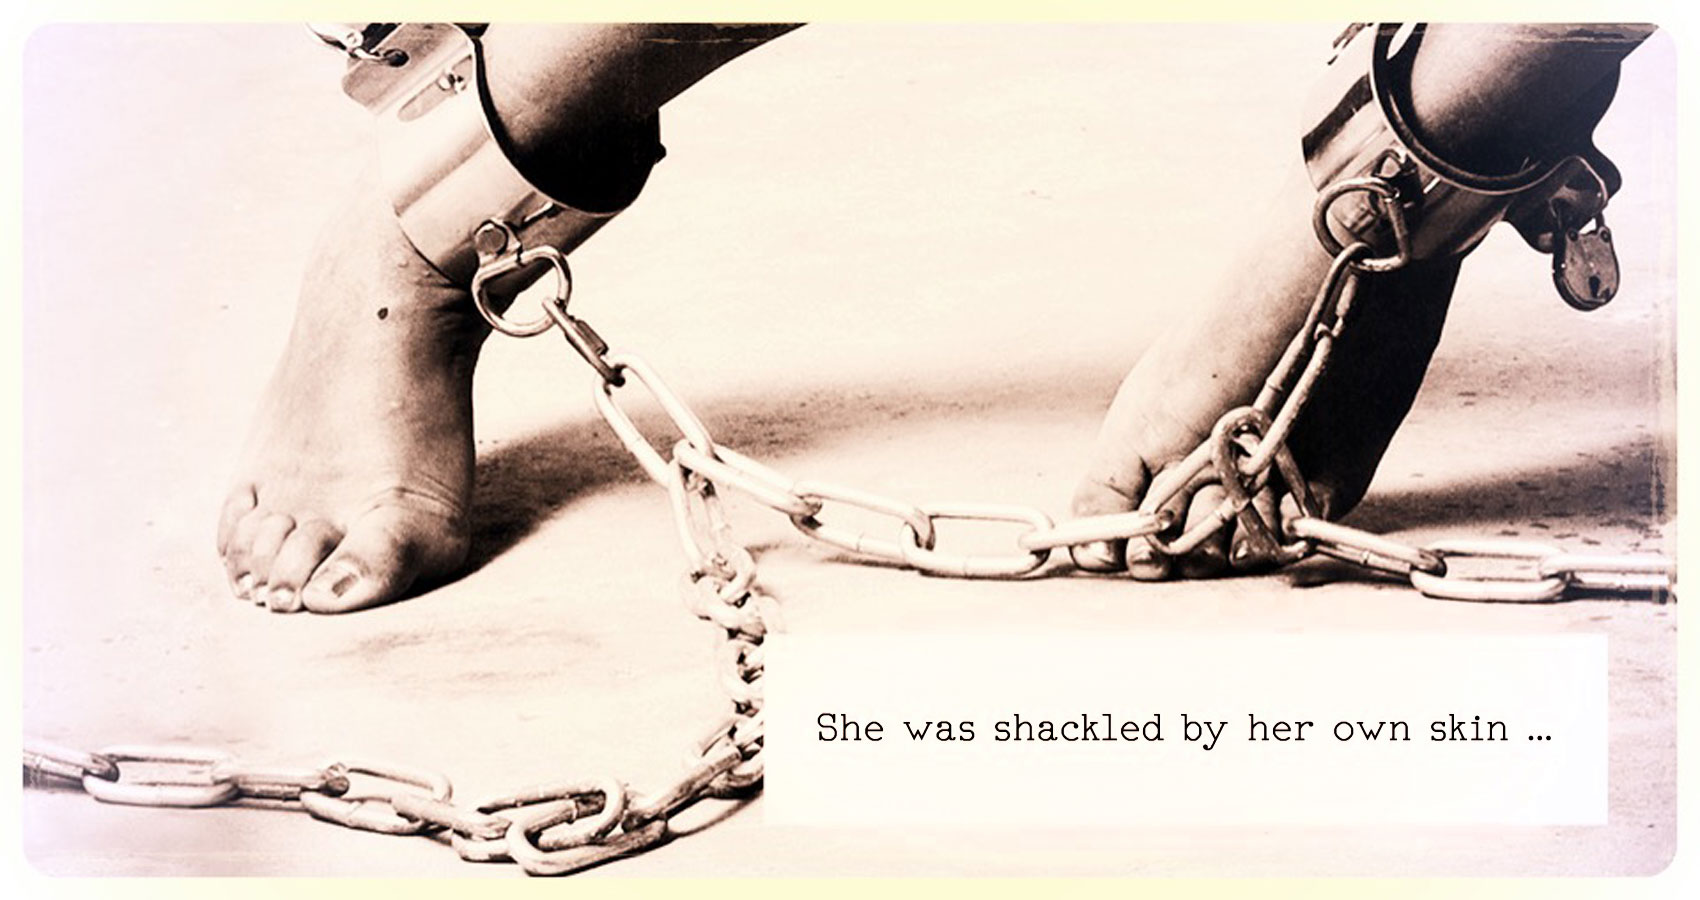 Shackles, written by Kabrie Waters at Spillwords.com